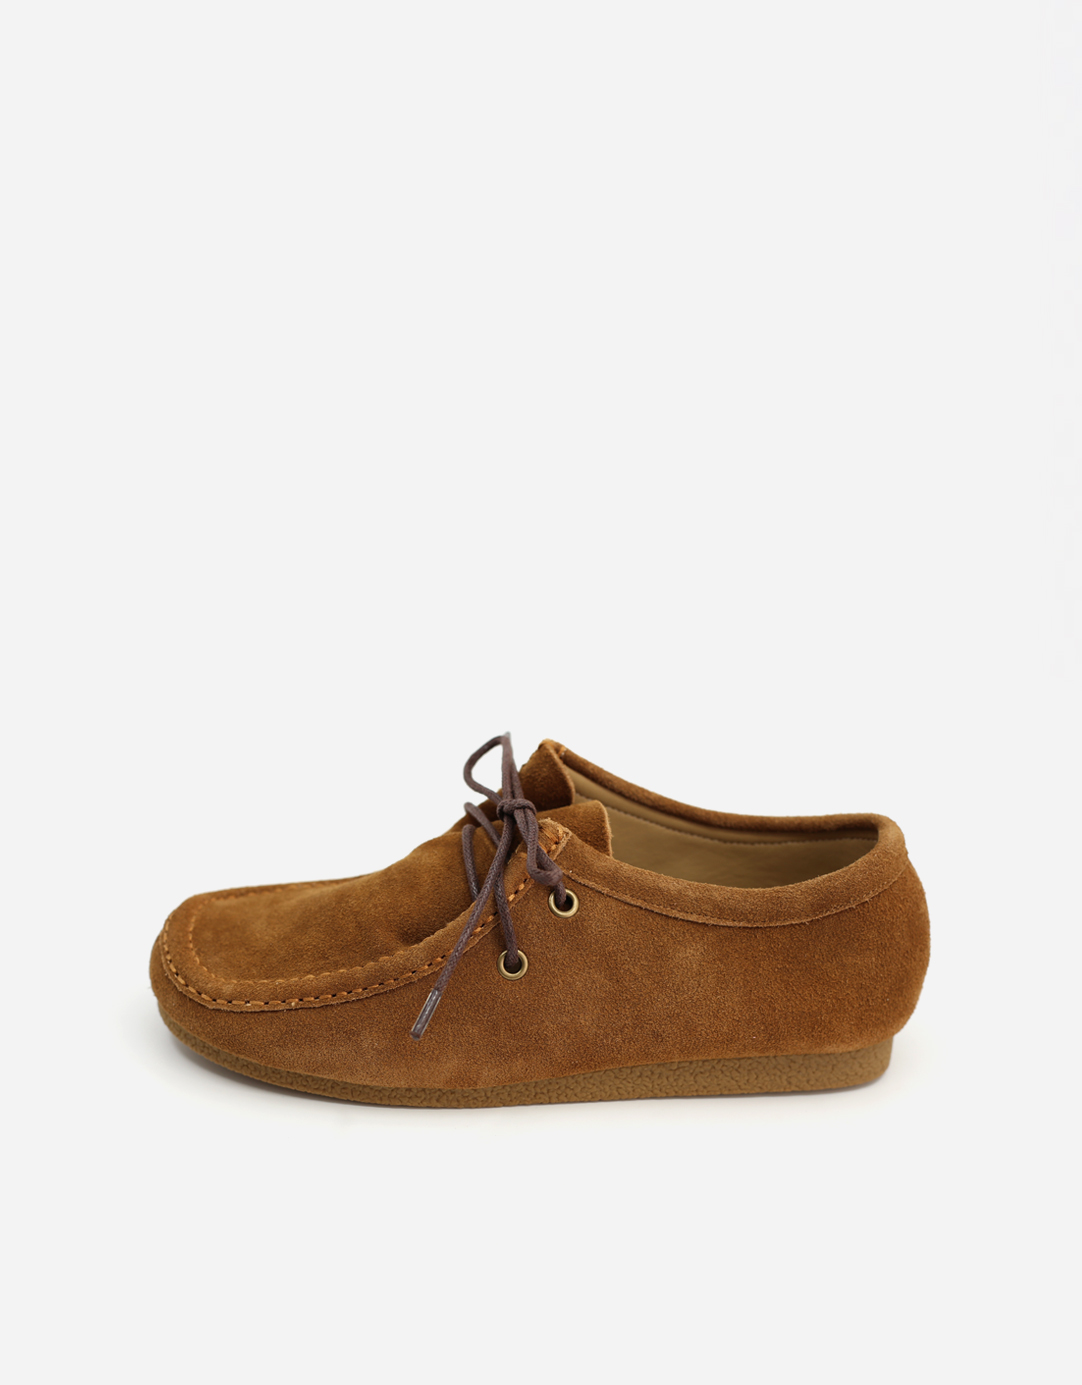 SUEDE BROWN WALLABY LOAFER